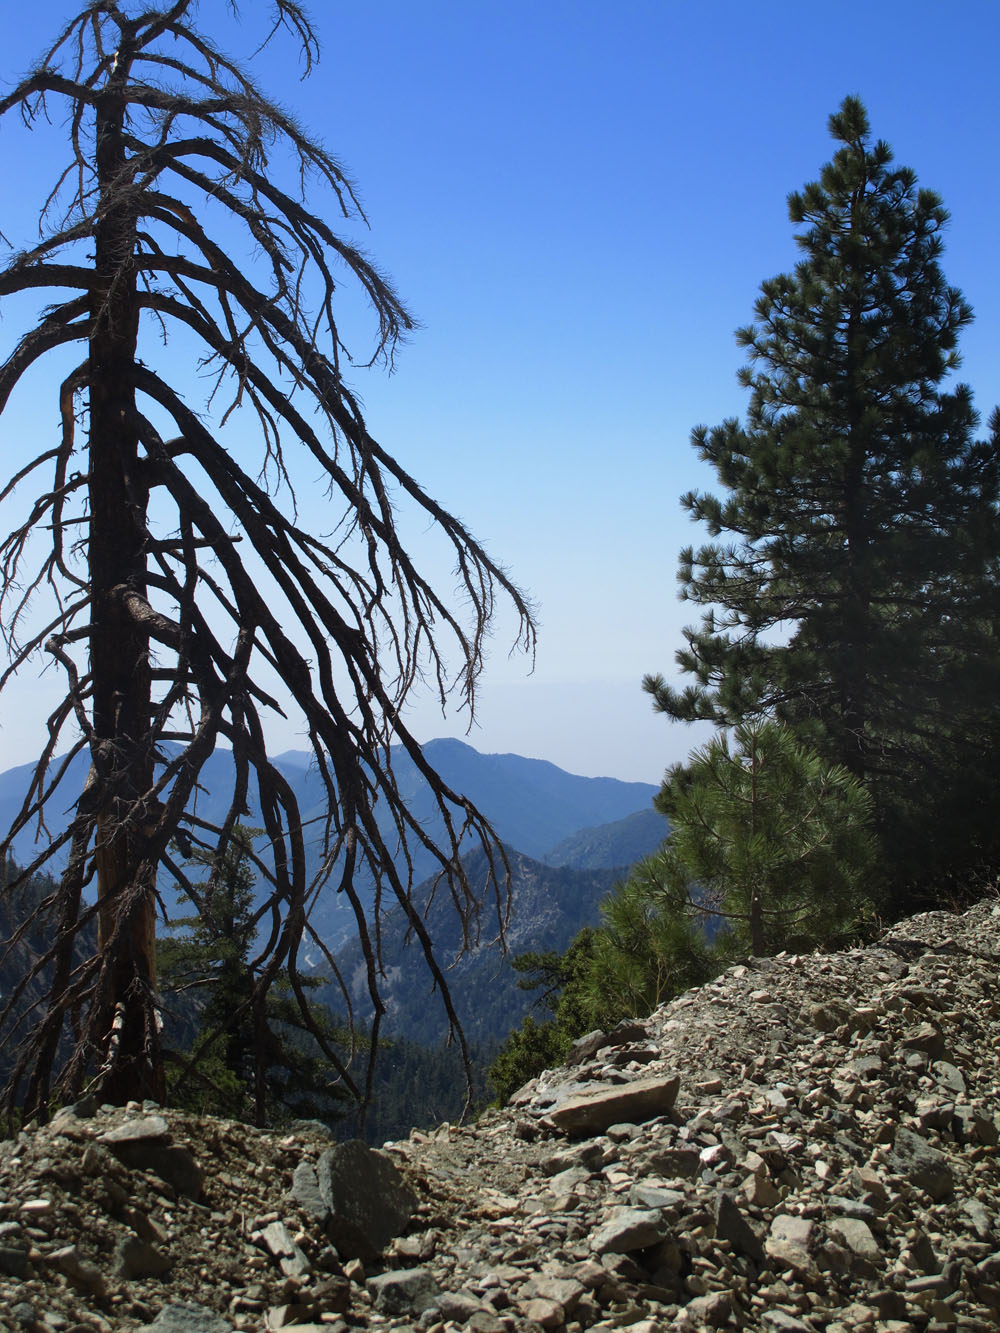 View from Mt Baldy, California